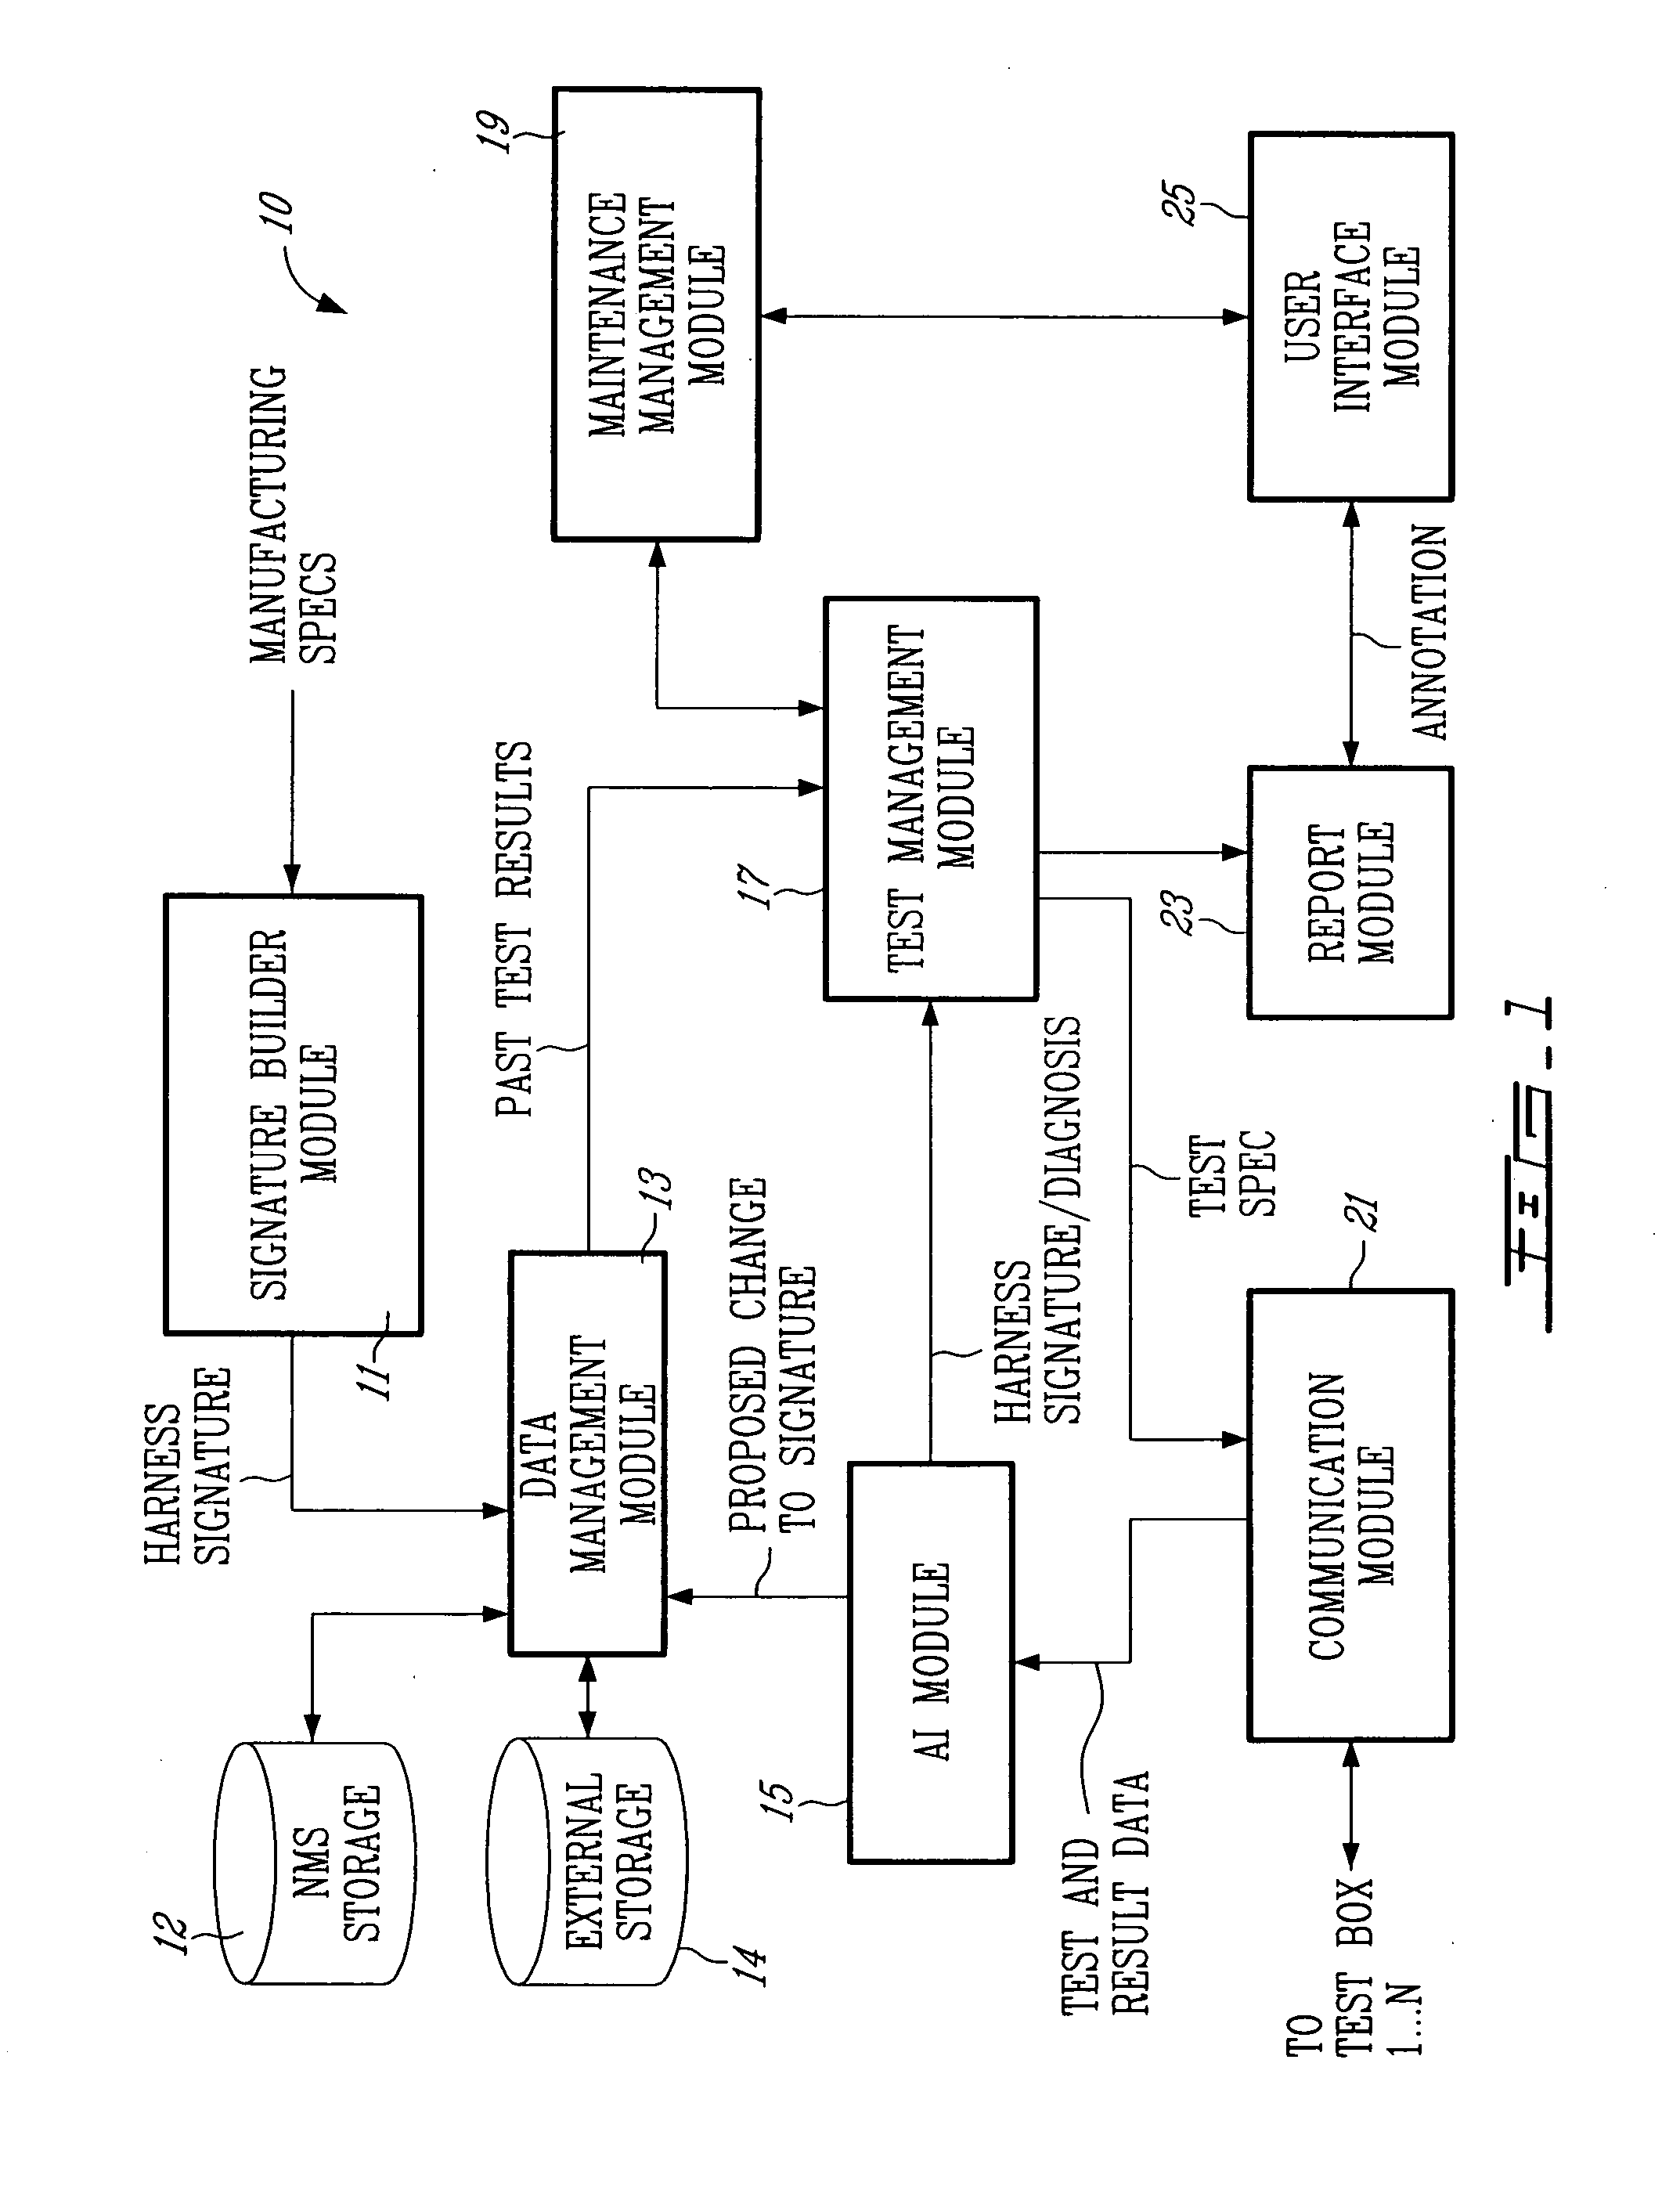 Wireless portable automated harness scanner system and method therefor